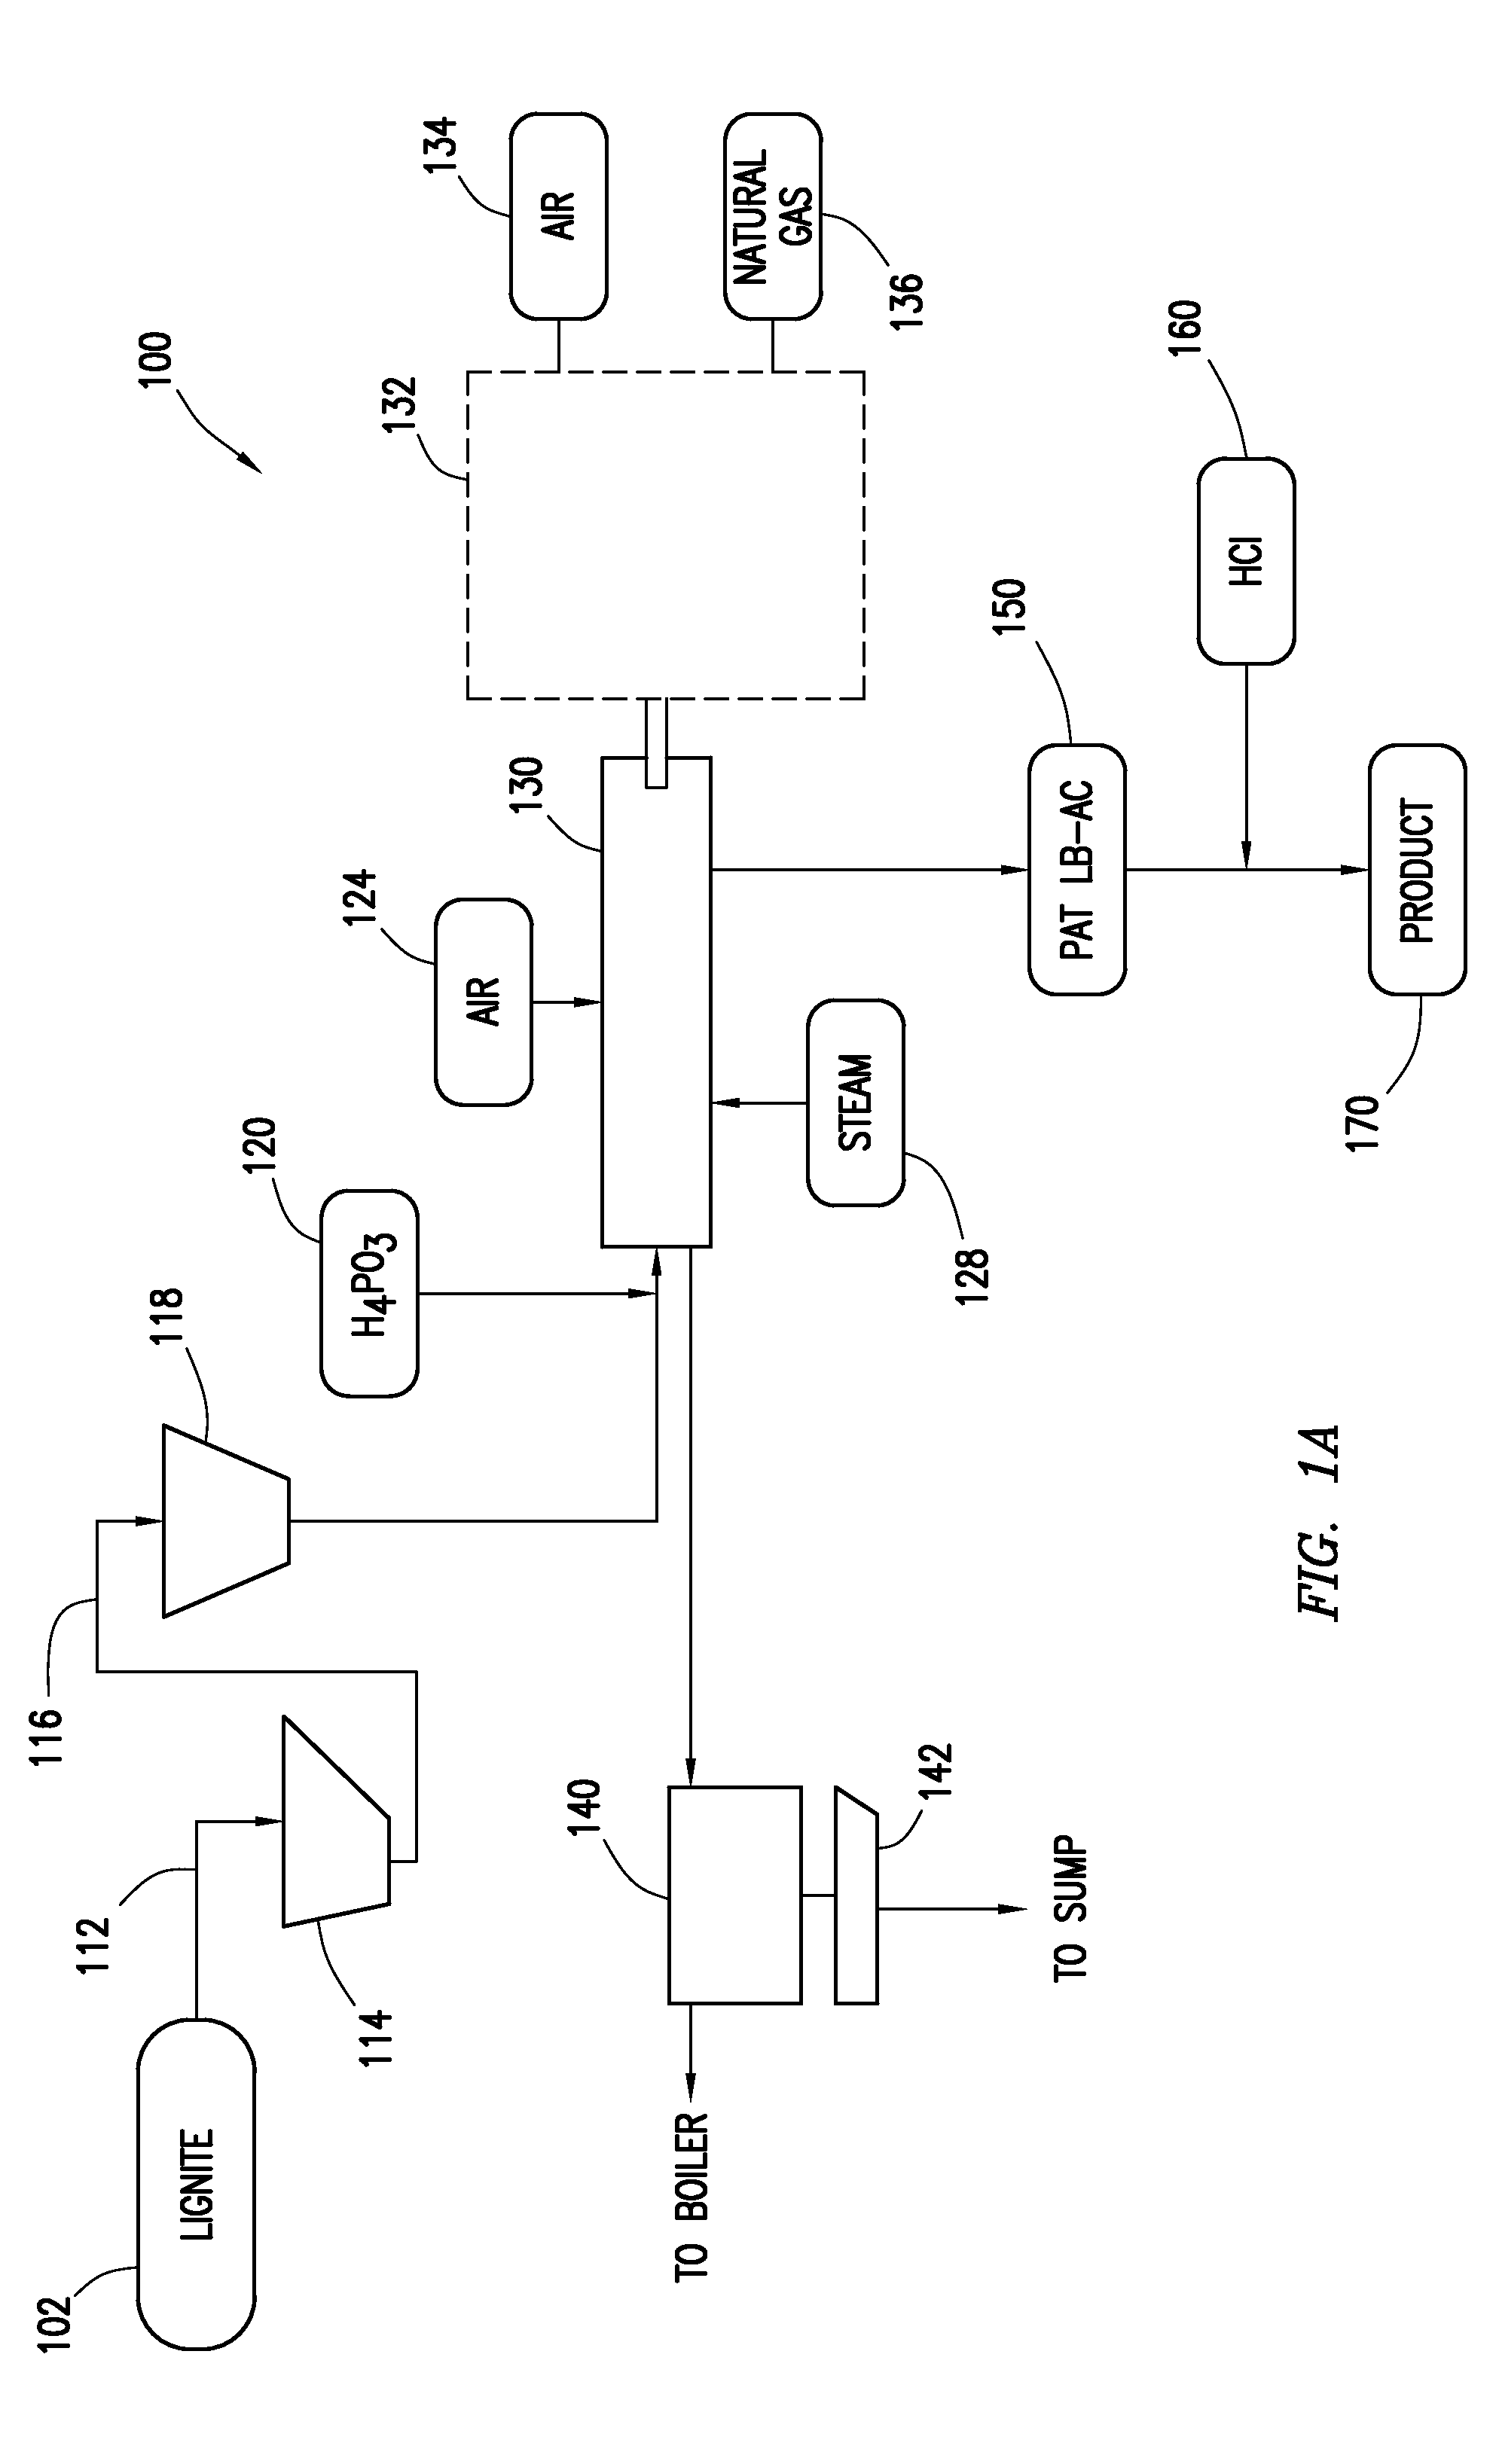 Phosphoric acid treatment of carbonaceous material prior to activation